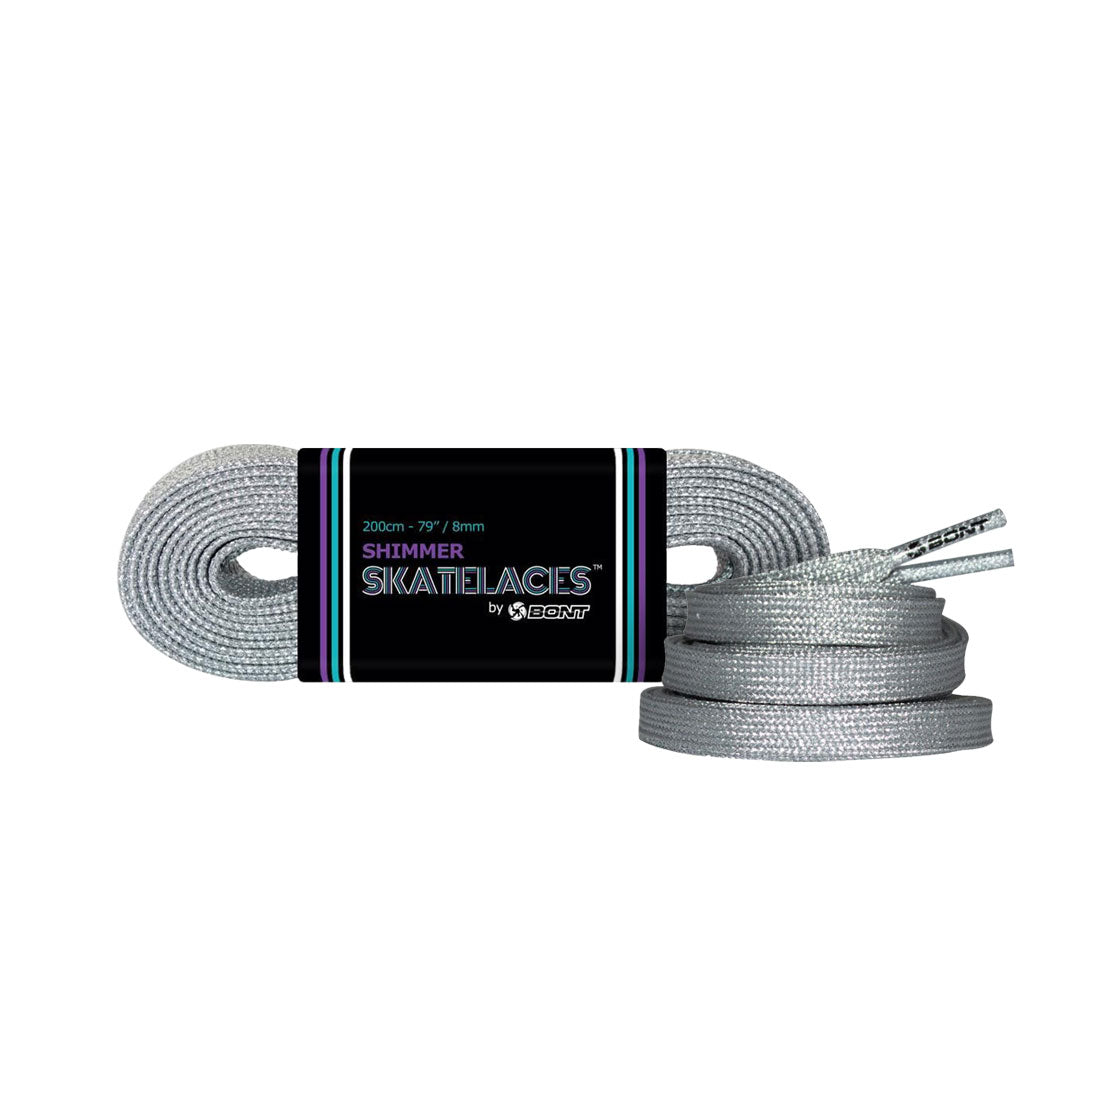 Bont Shimmer 8mm Laces - 245cm/96in Cyborg Silver Laces